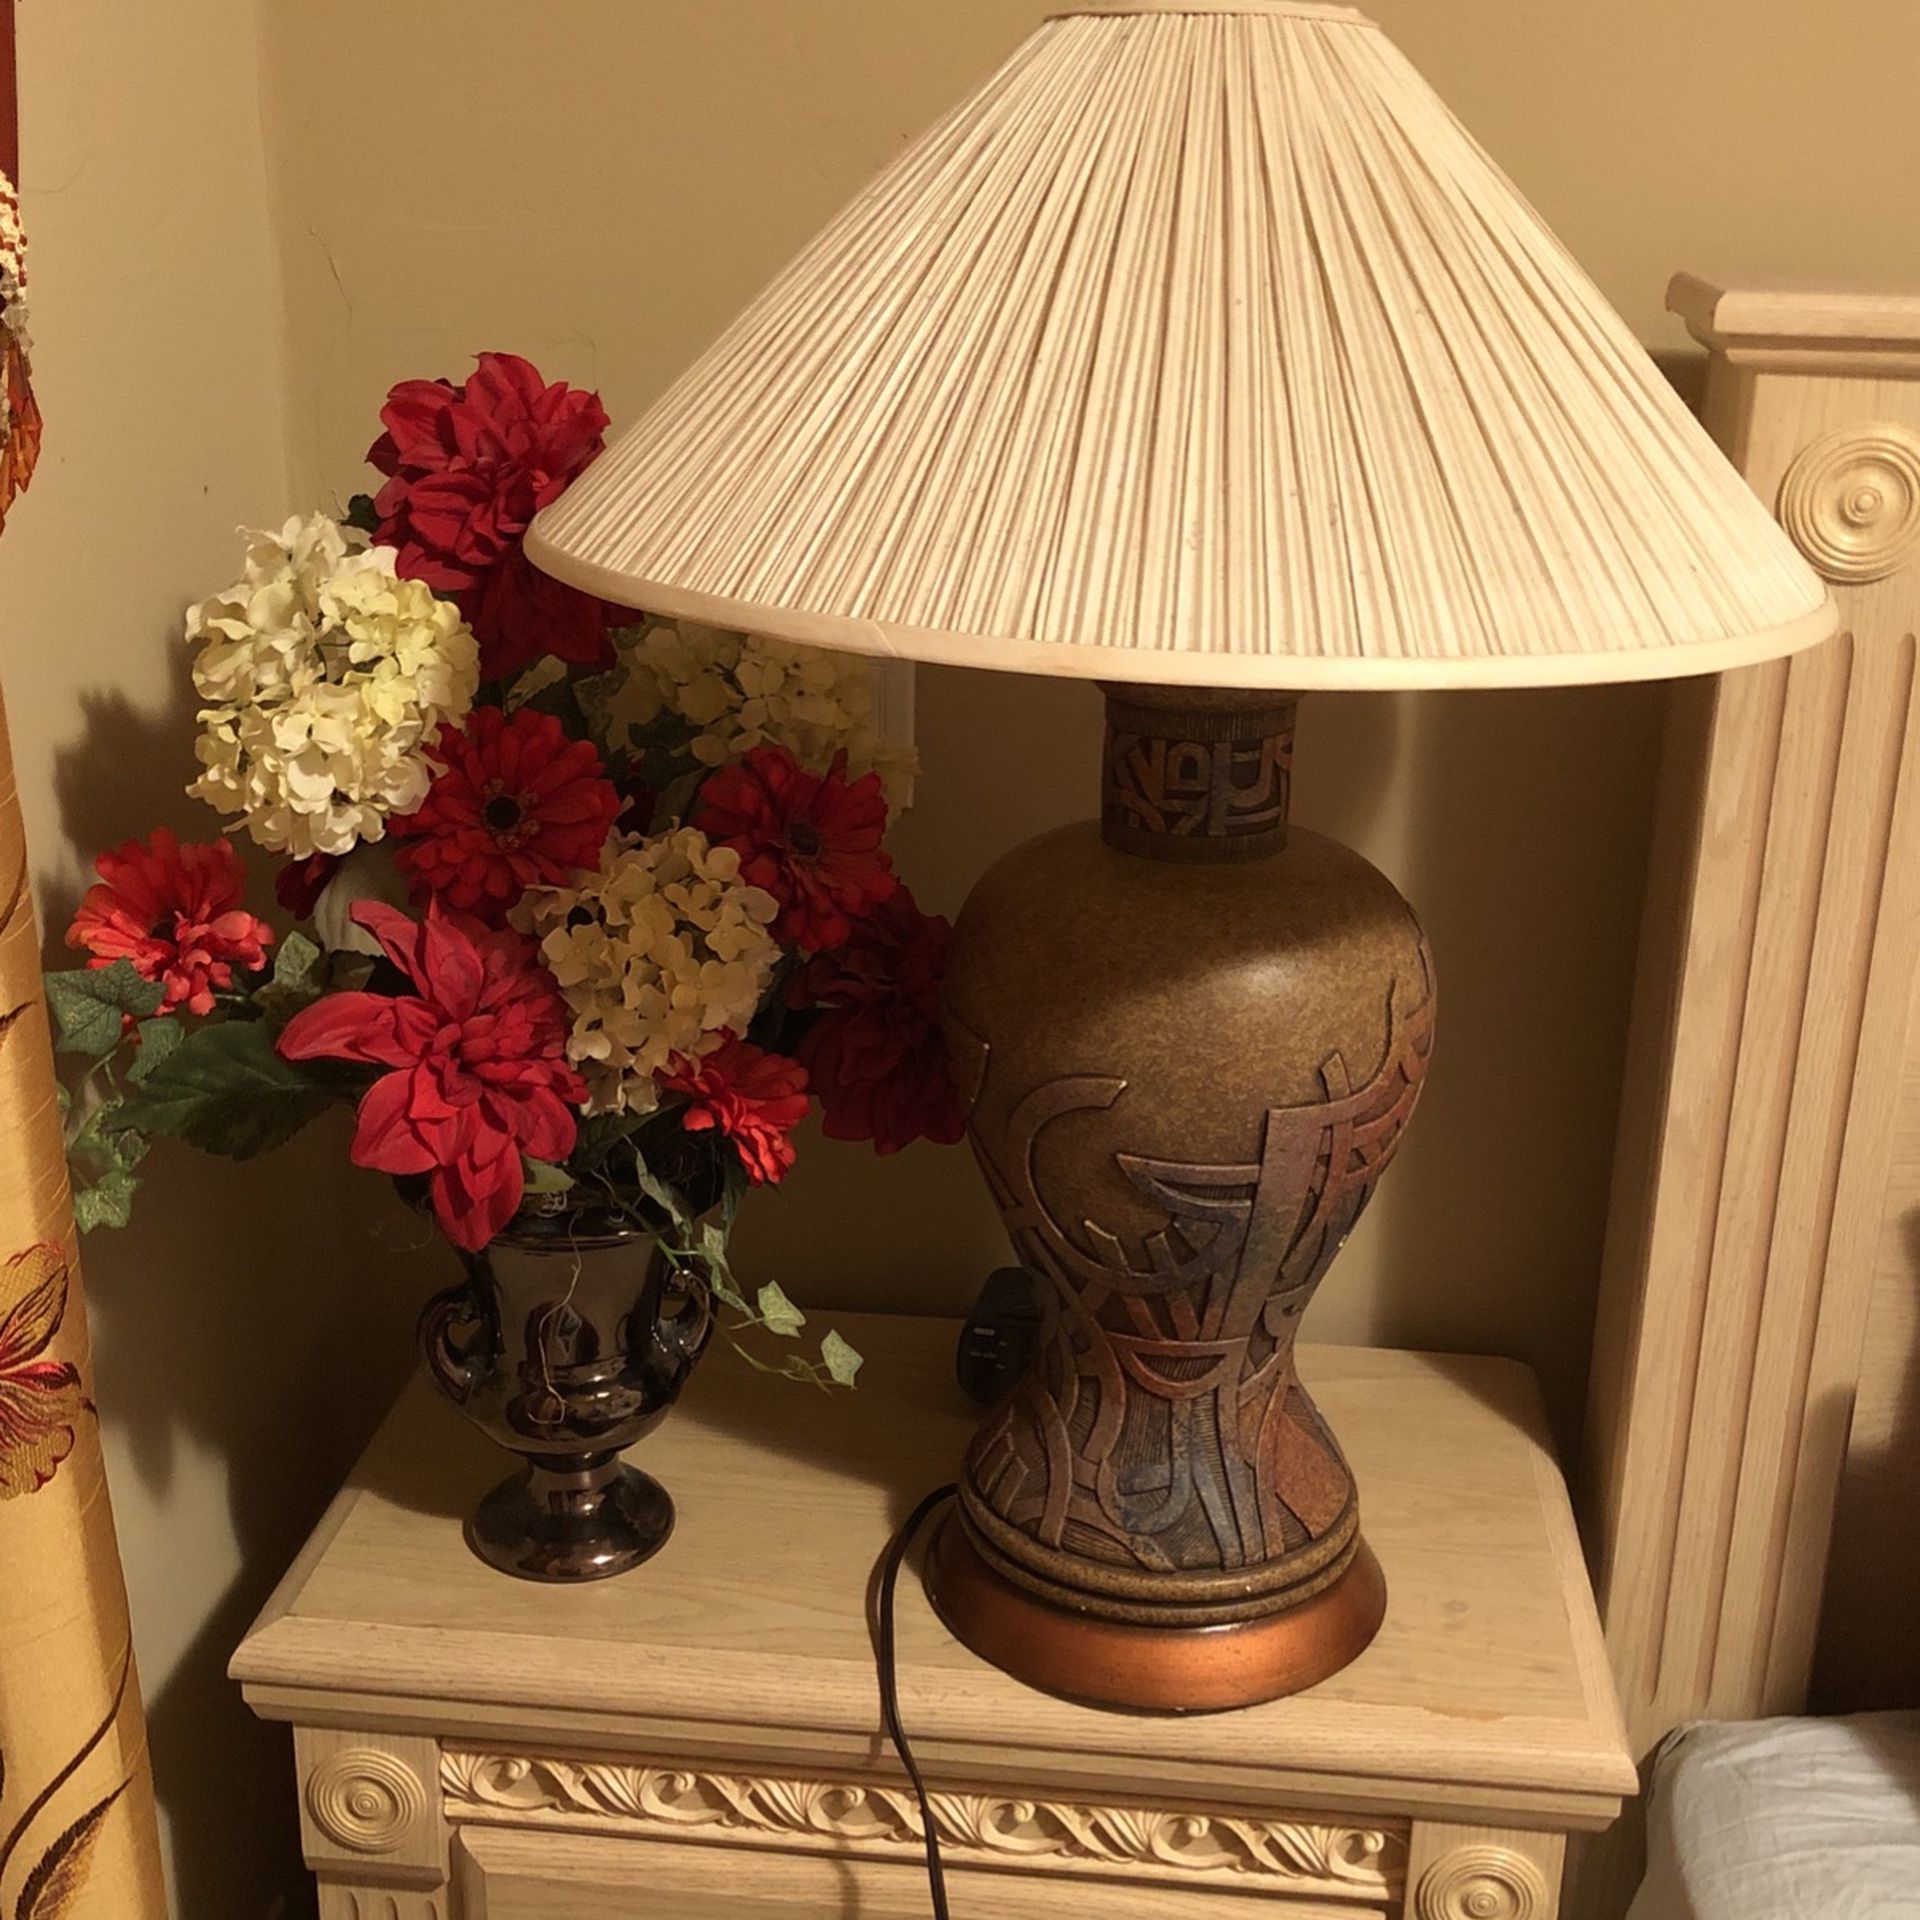 Gorgeous Lamp And Vase With Flowers